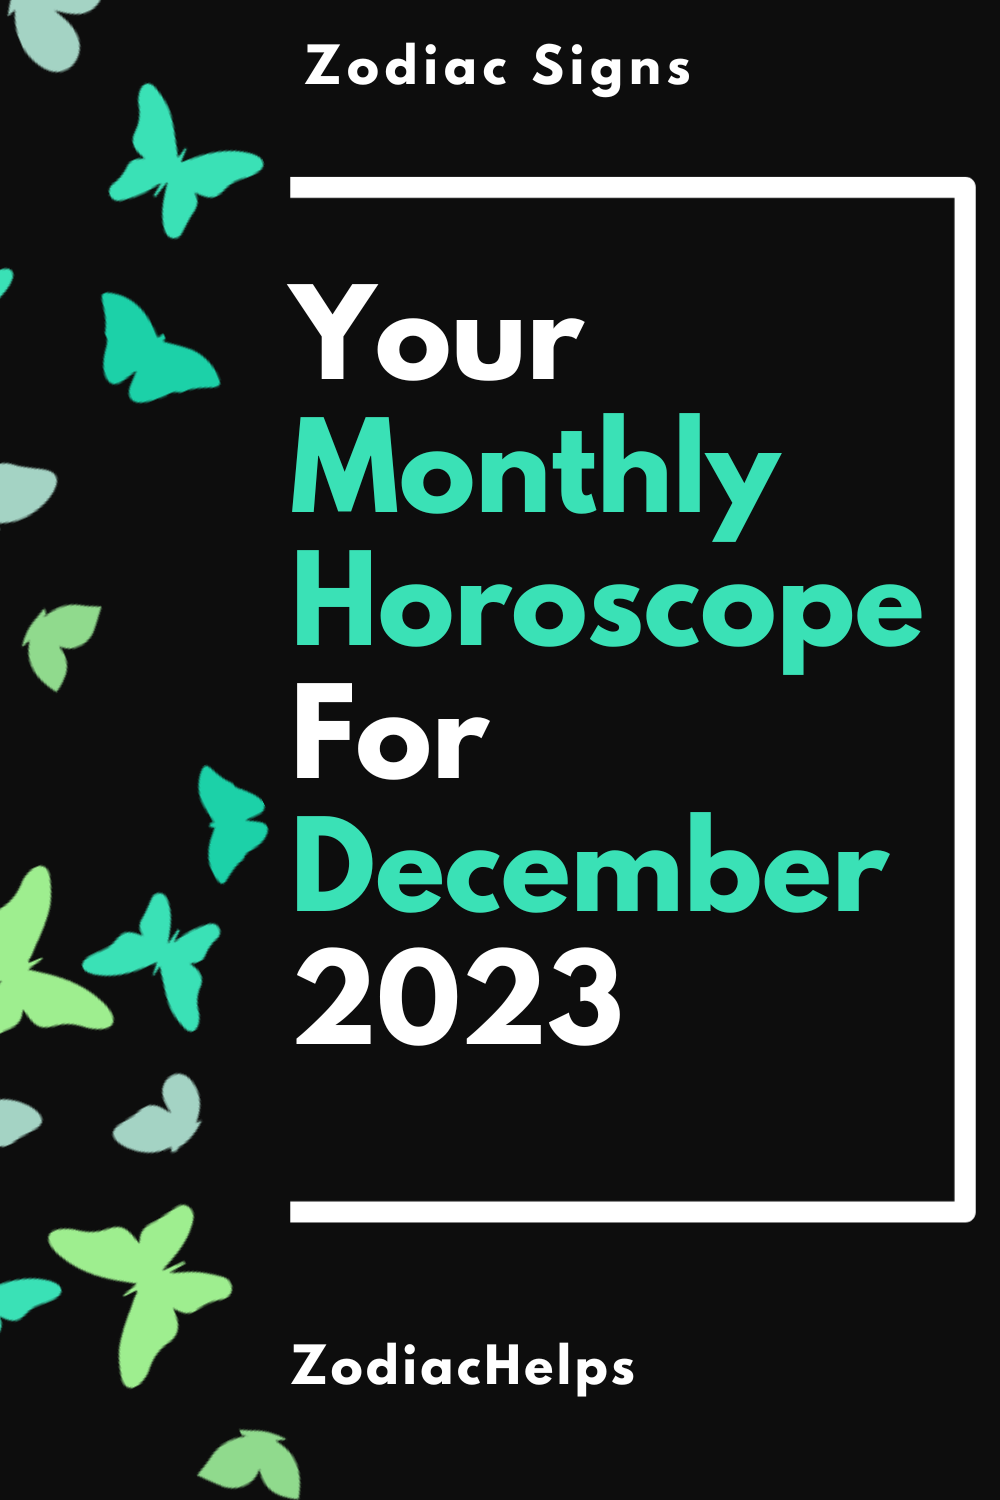 Your Monthly Horoscope For December 2023